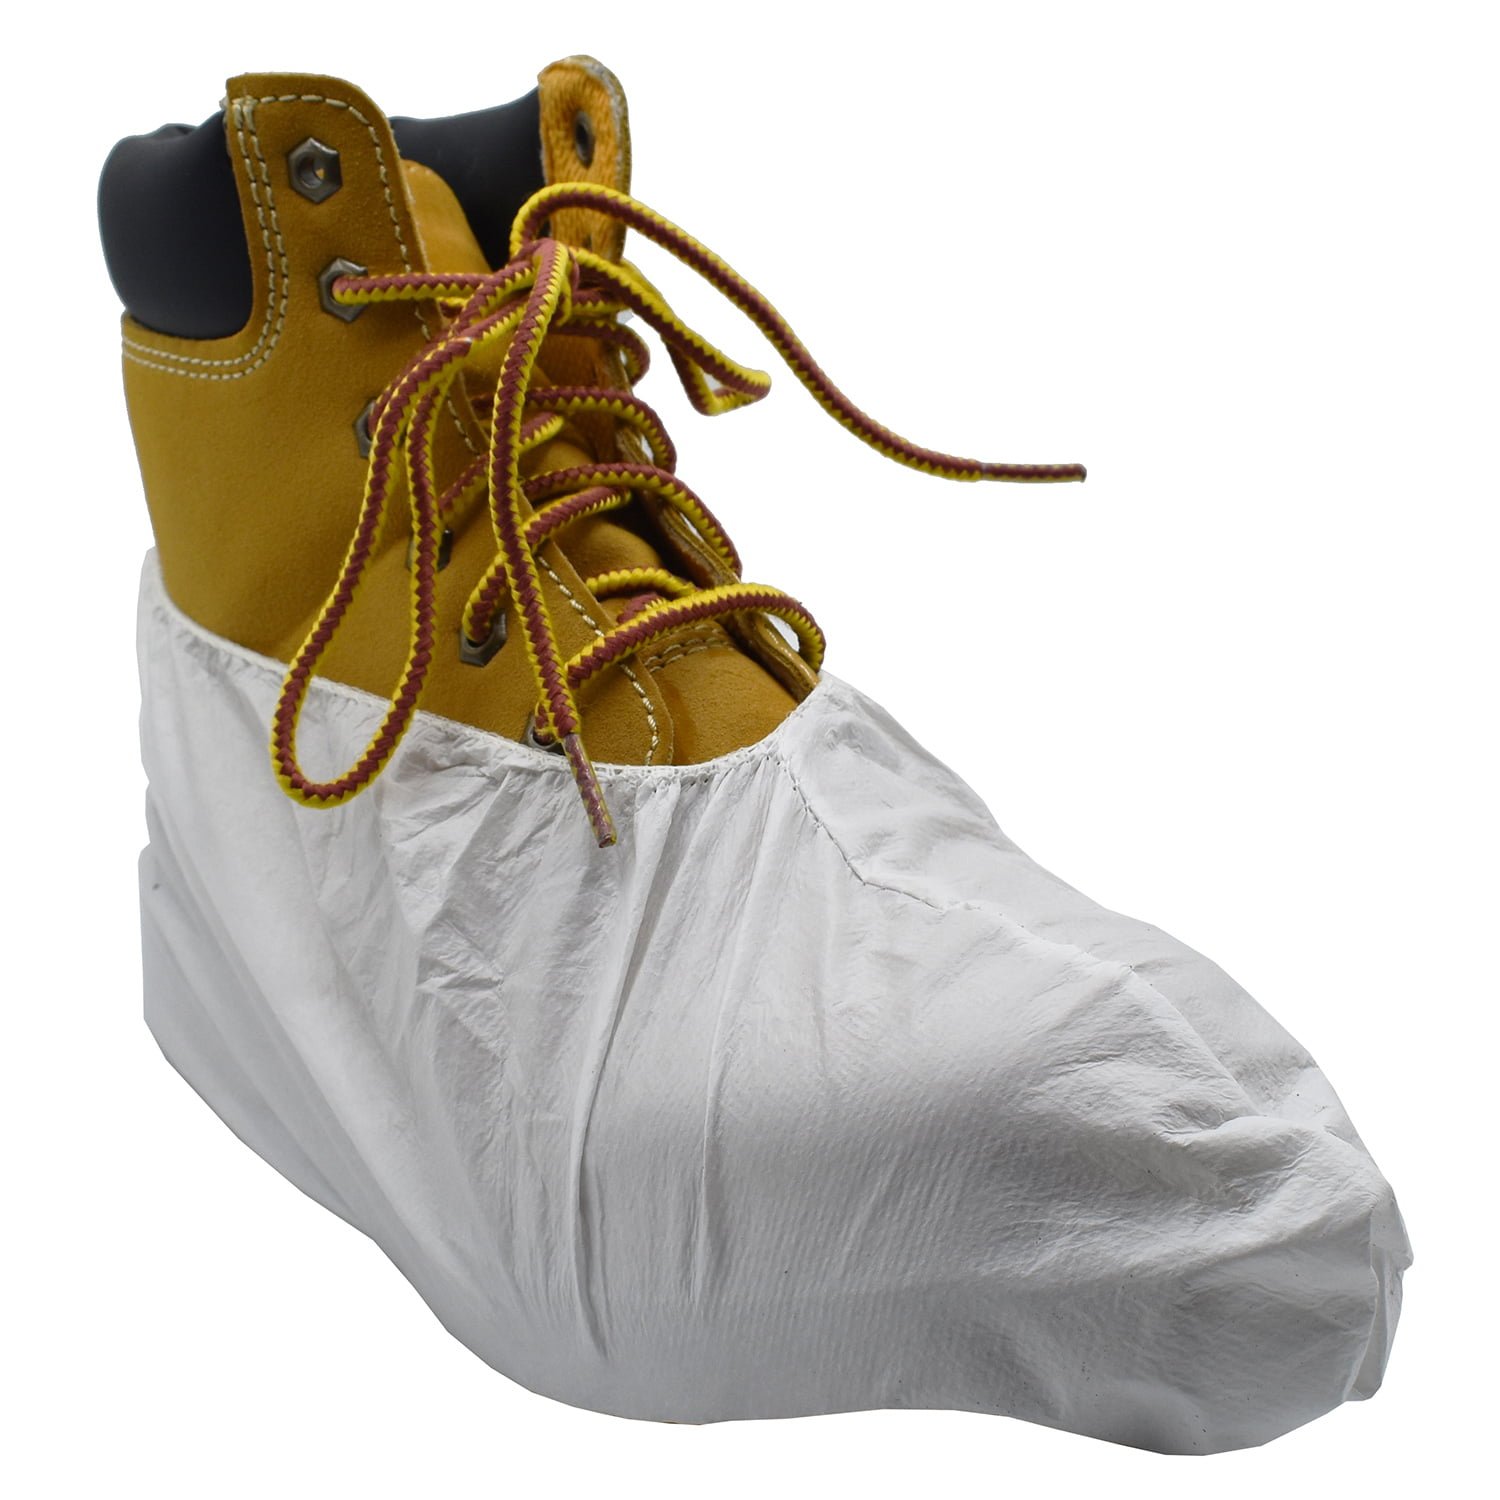 Shoe Cover, DEFENDER II™: #MPSCL (SOLD BY THE CASE OF 200)